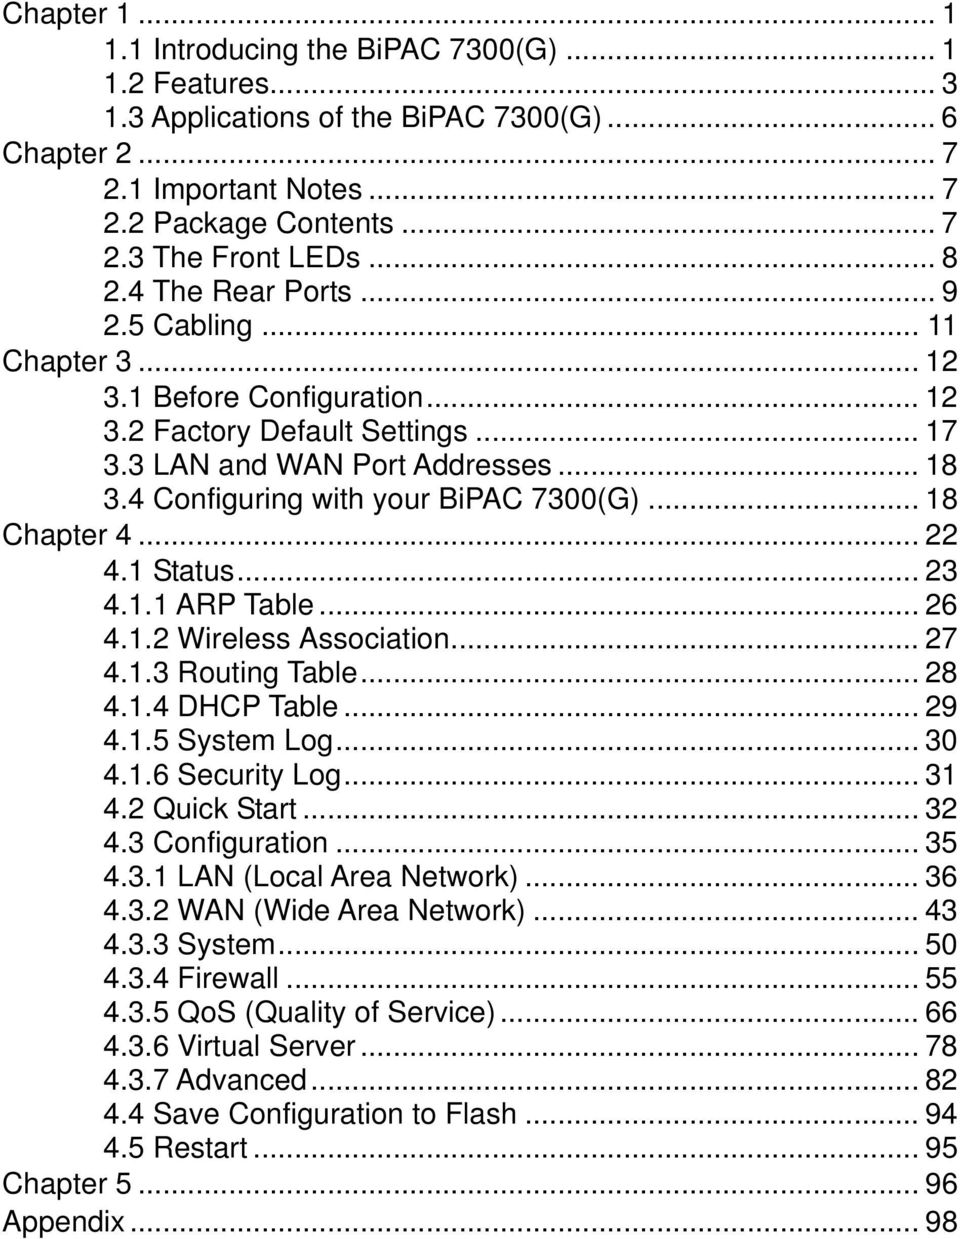 4 Configuring with your BiPAC 7300(G)... 18 Chapter 4... 22 4.1 Status... 23 4.1.1 ARP Table... 26 4.1.2 Wireless Association... 27 4.1.3 Routing Table... 28 4.1.4 DHCP Table... 29 4.1.5 System Log.